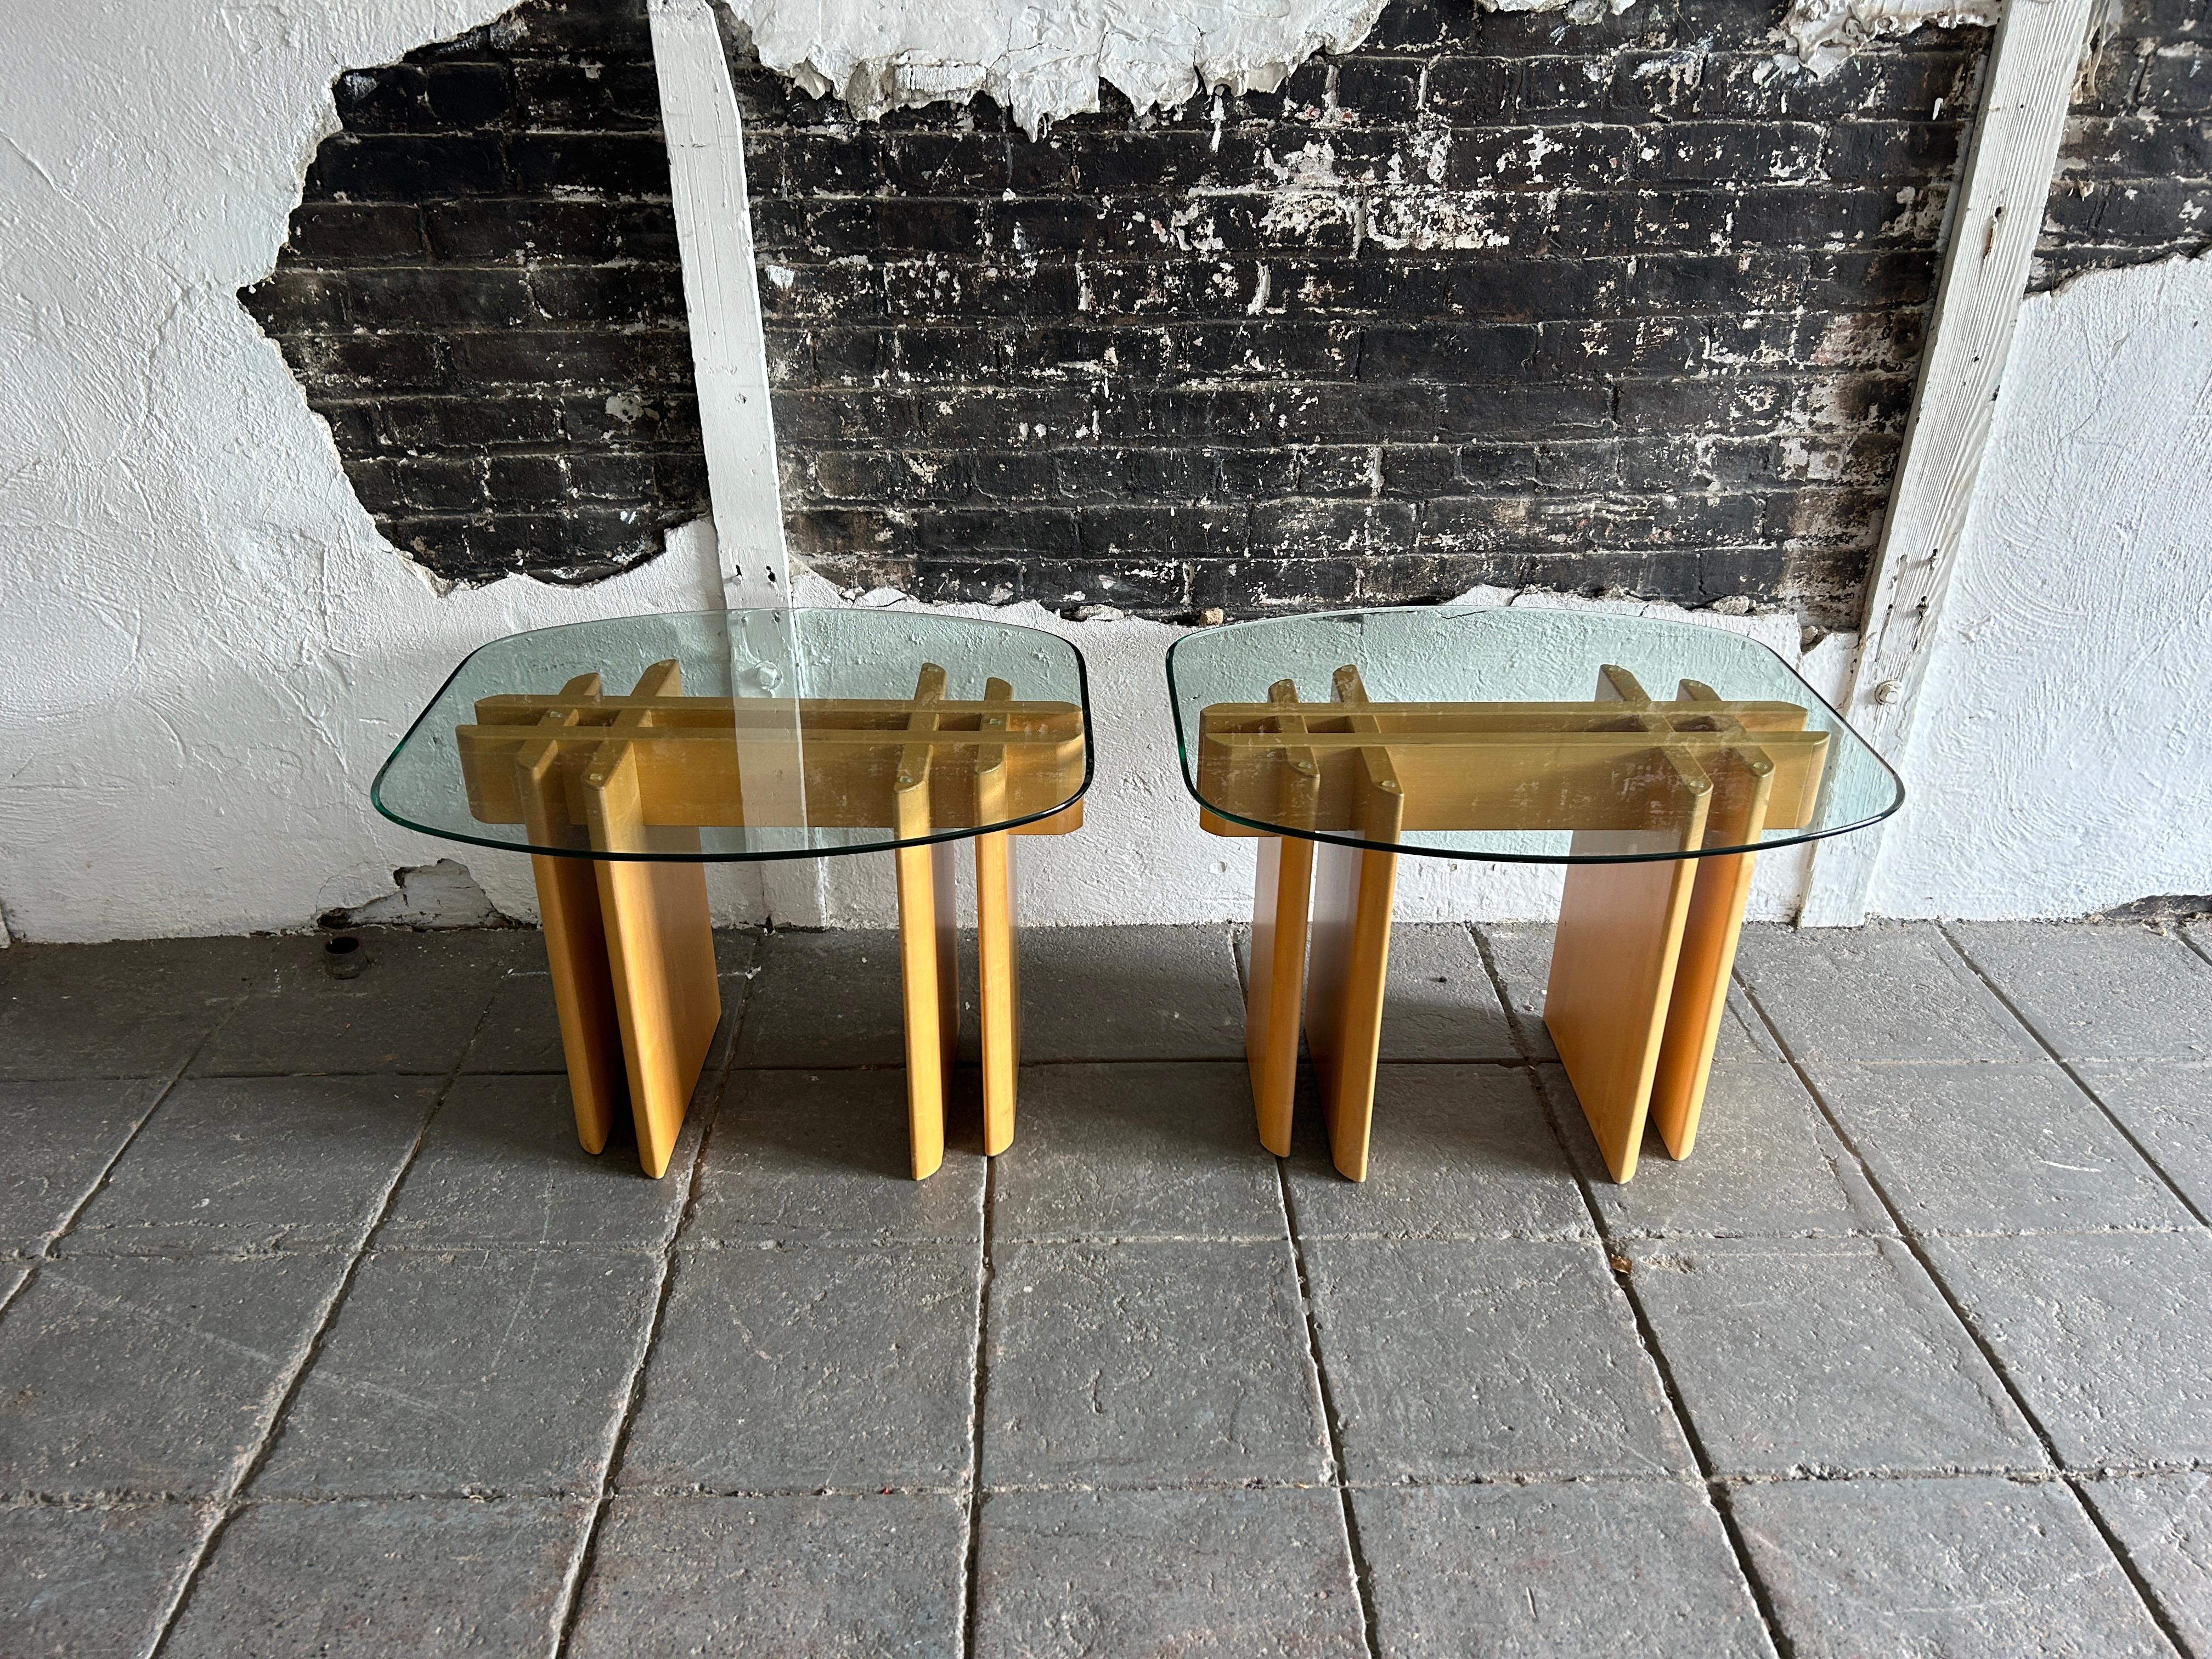 Pair of Table Gustav Gaarde birch and glass end tables.

Sold a as a pair 